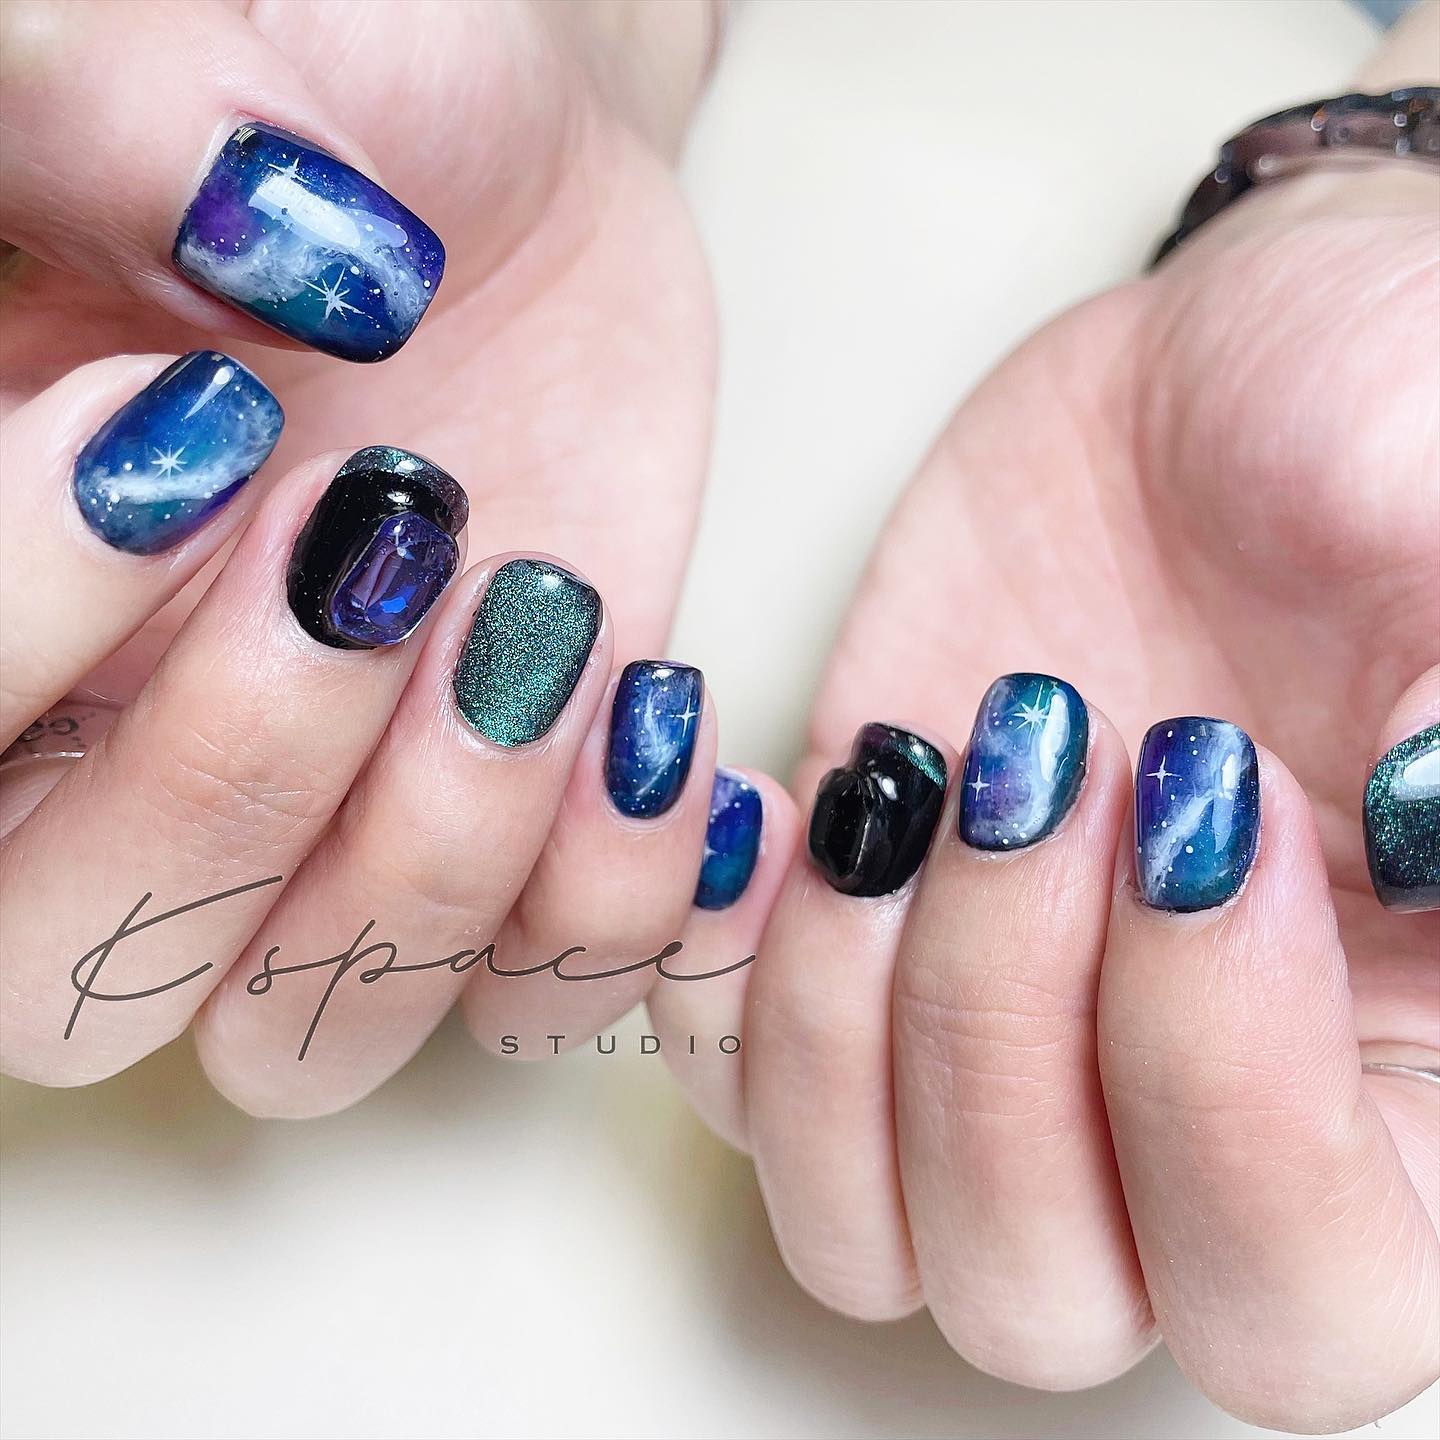 Blue and green nail colors with galaxy-inspired nail art on short tapered square nails